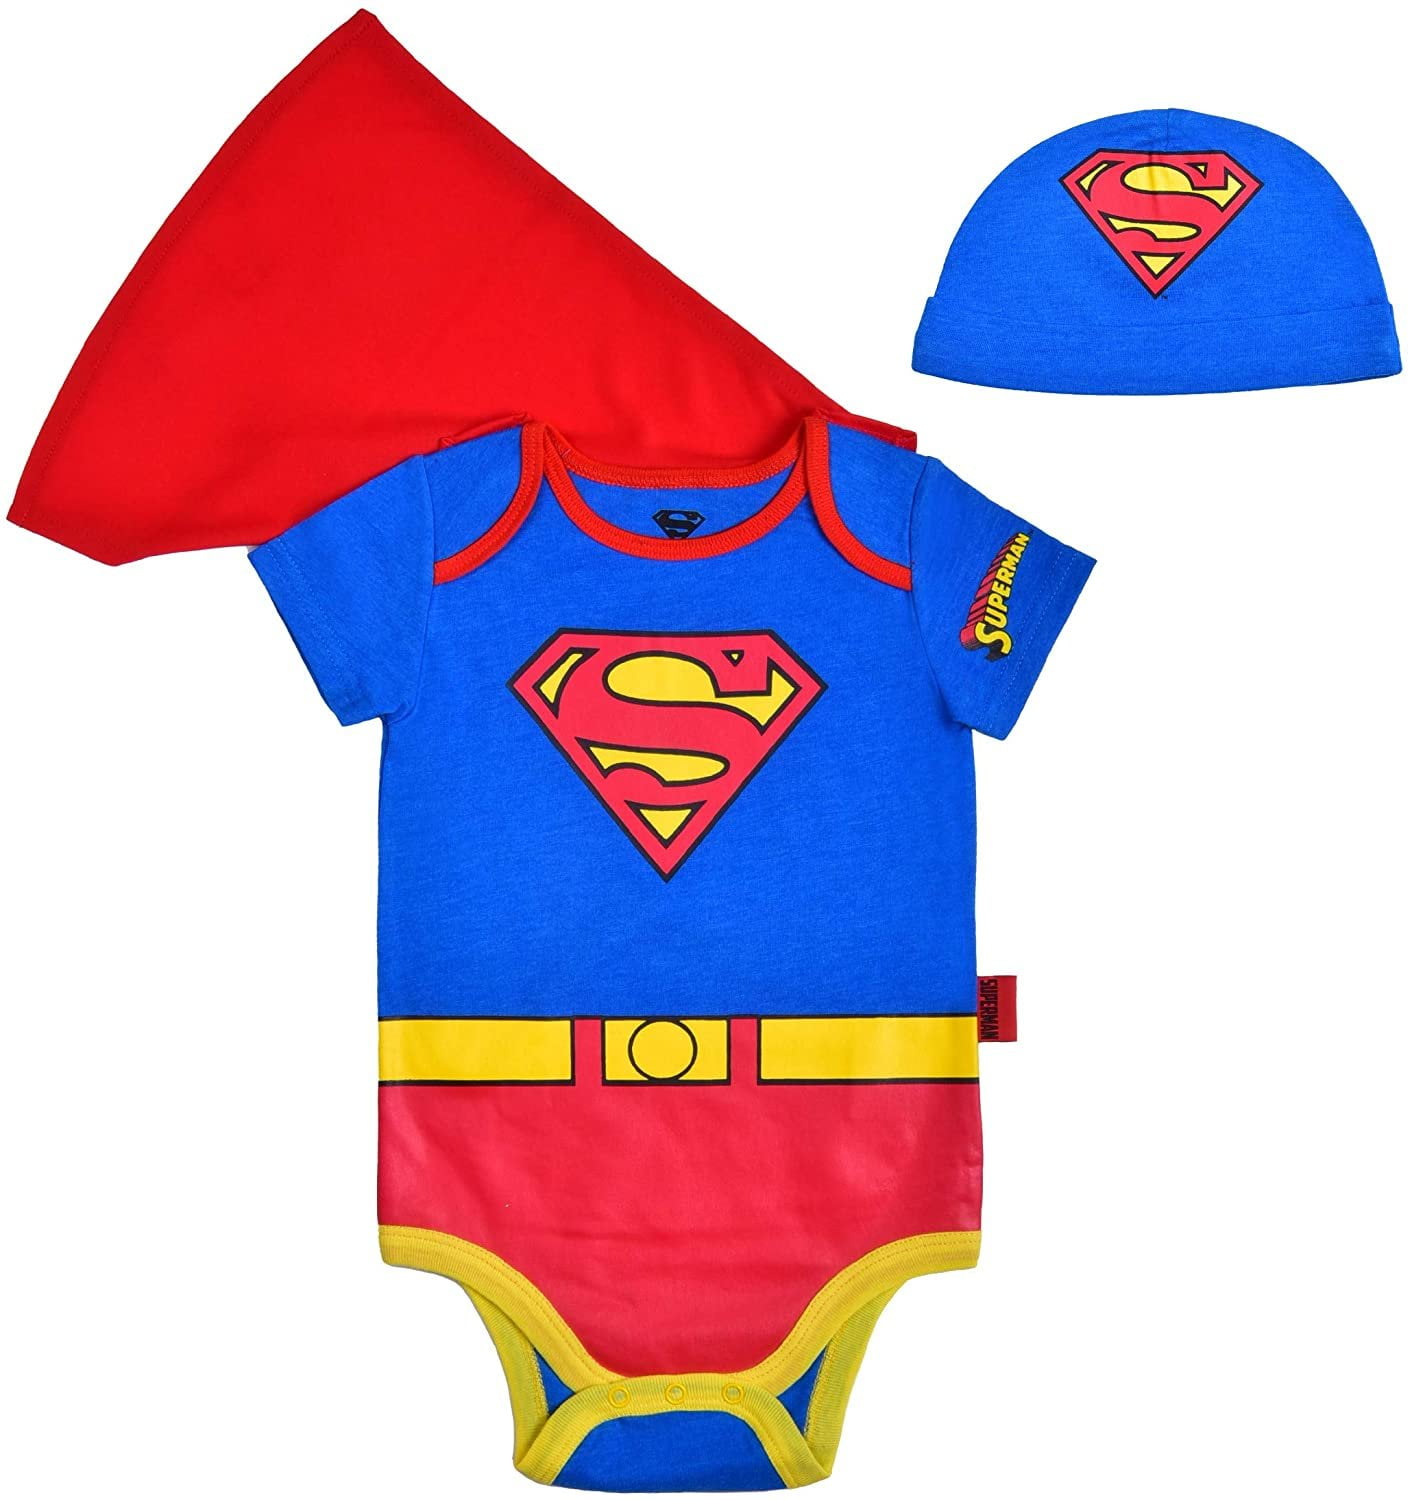 SUPERMAN~BLUE AND RED SALE~SUPERMAN BABY CREEPER~SIZE 3/6 MO~SUPERMAN SUPERMAN 